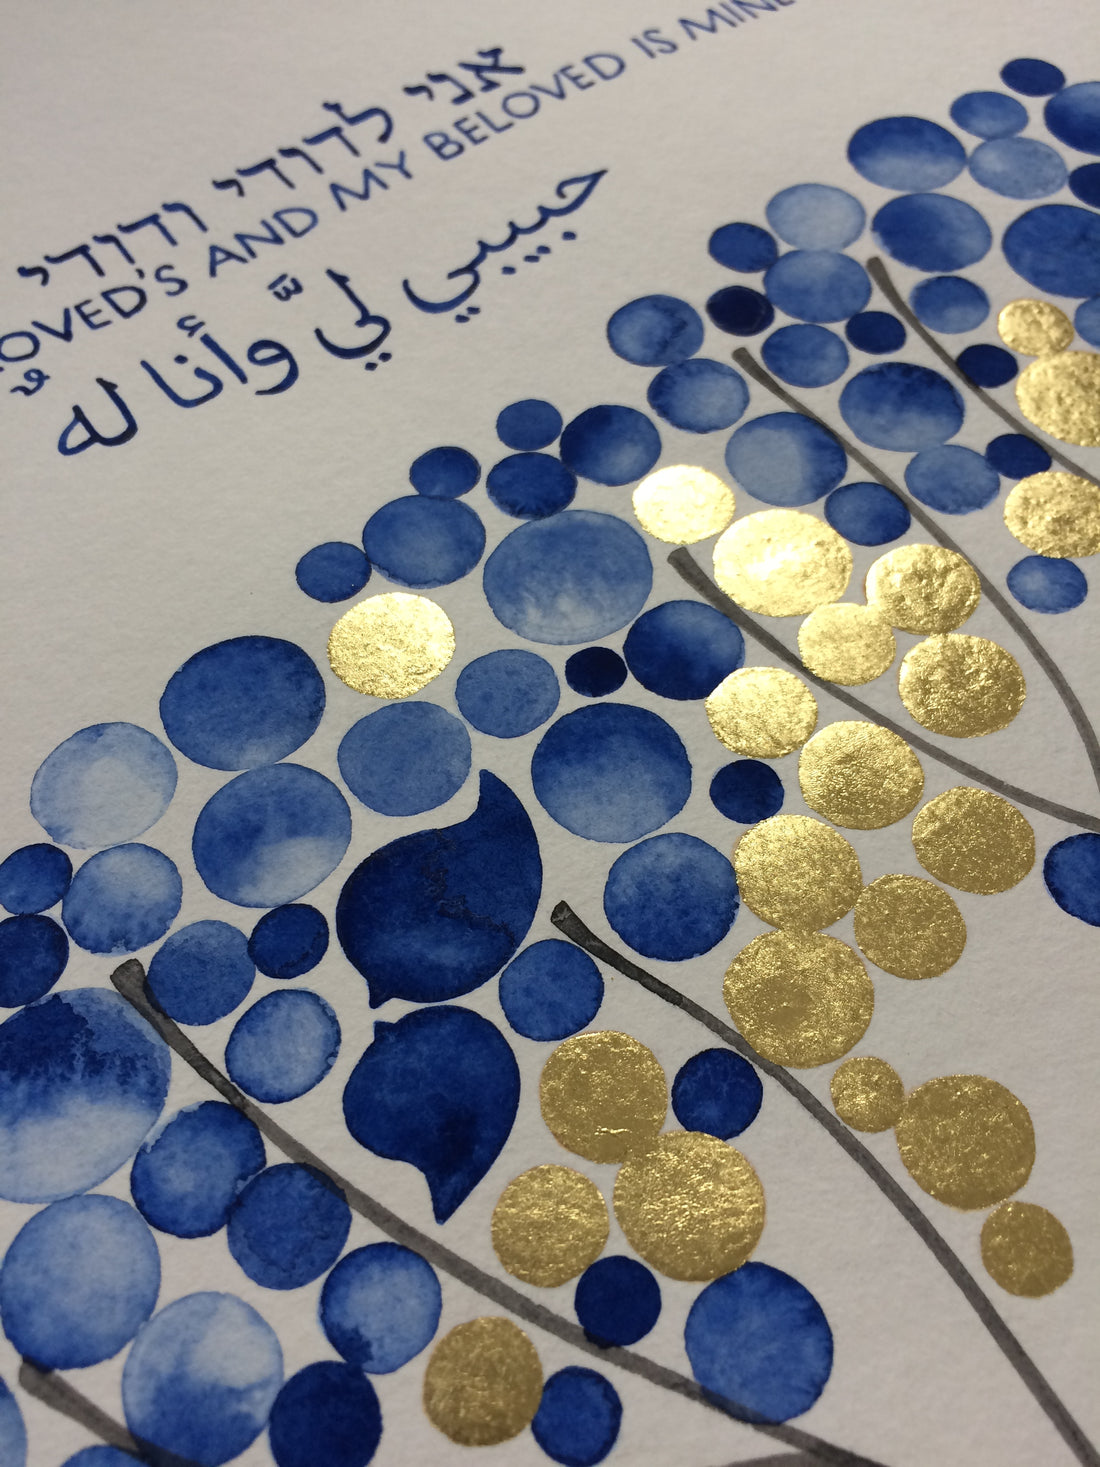 Trilingual Ketubah with gold leaf watercolor painting